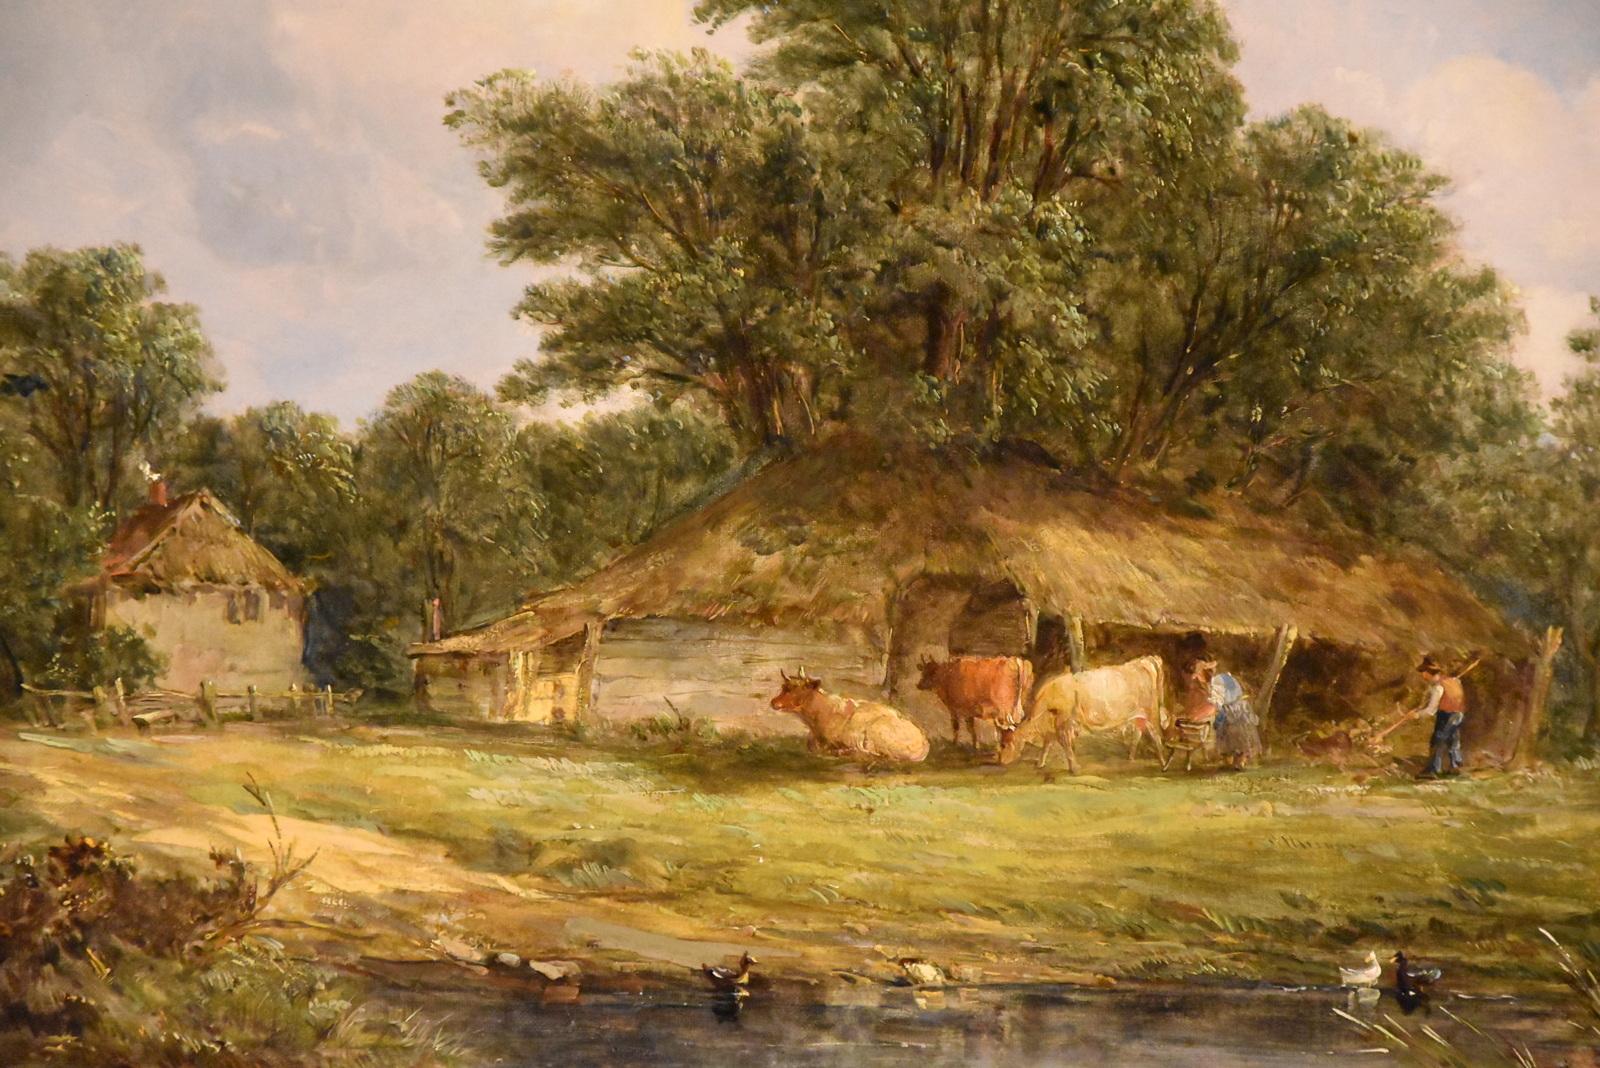 Oil painting by Alfred Vickers senior “The Cattle Byre” 1